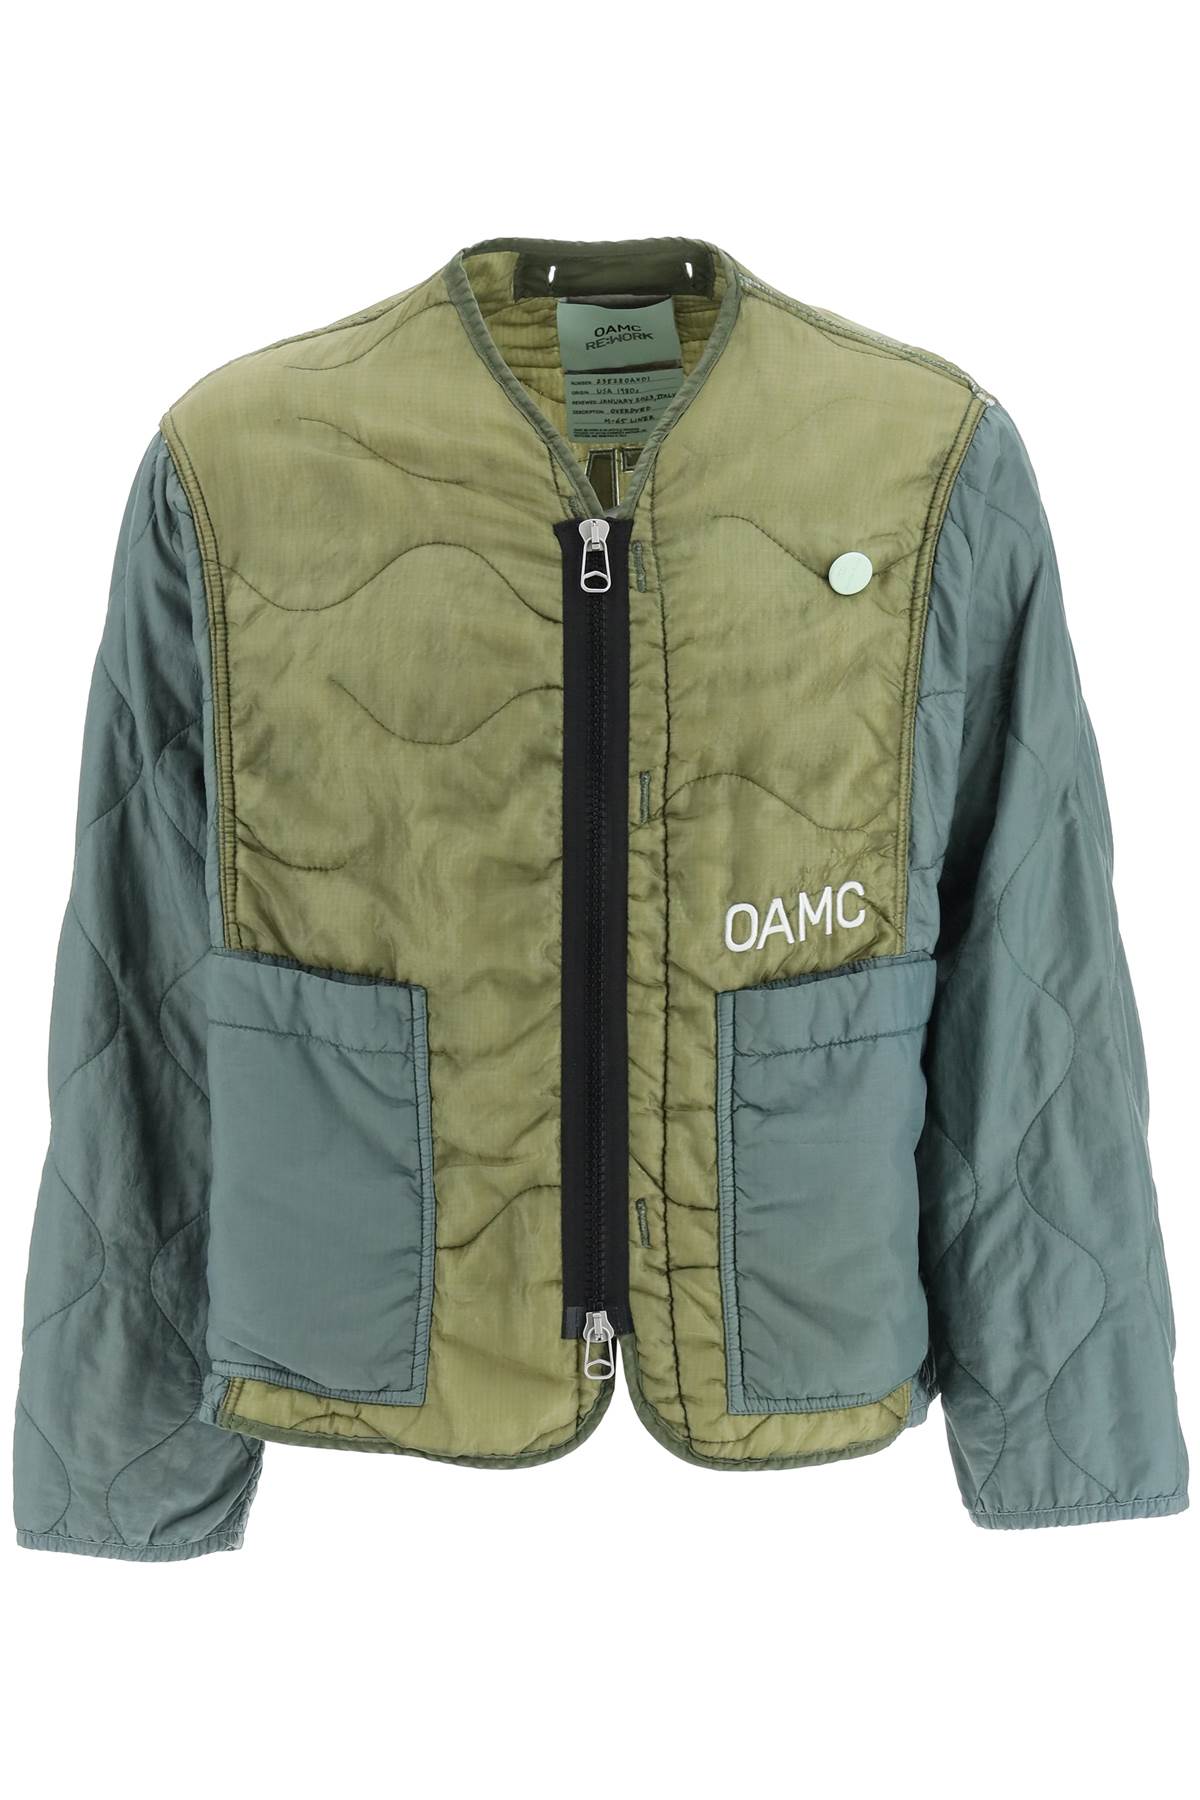 OAMC PEACEMAKER QUILTED LINER JACKET